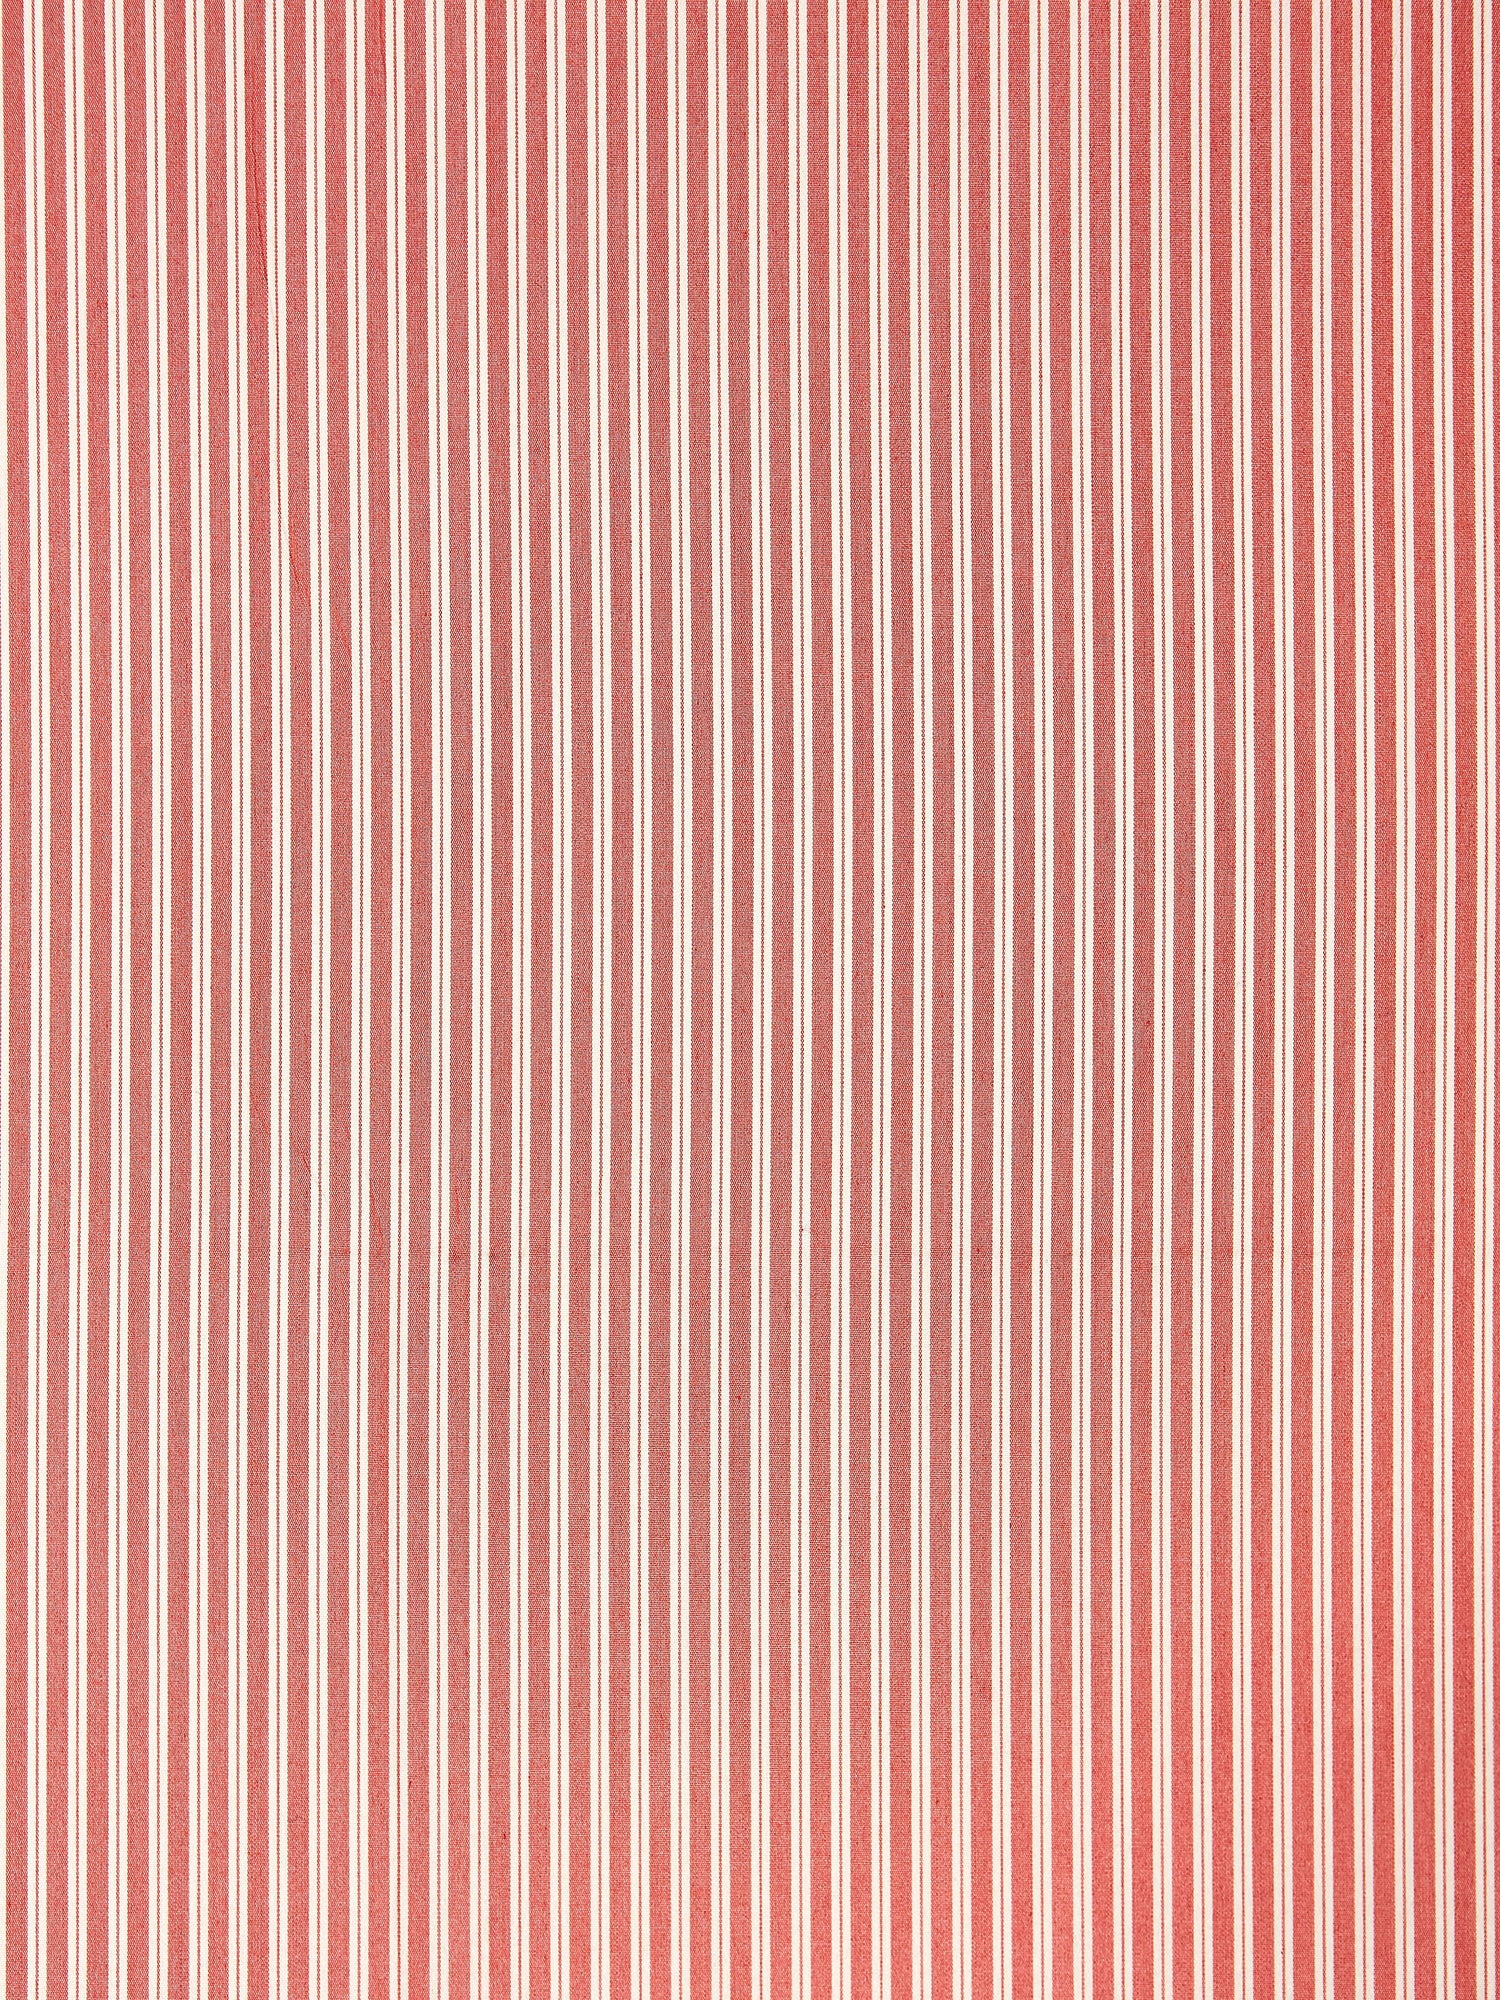 Kent Stripe fabric in blush color - pattern number SC 000336395 - by Scalamandre in the Scalamandre Fabrics Book 1 collection